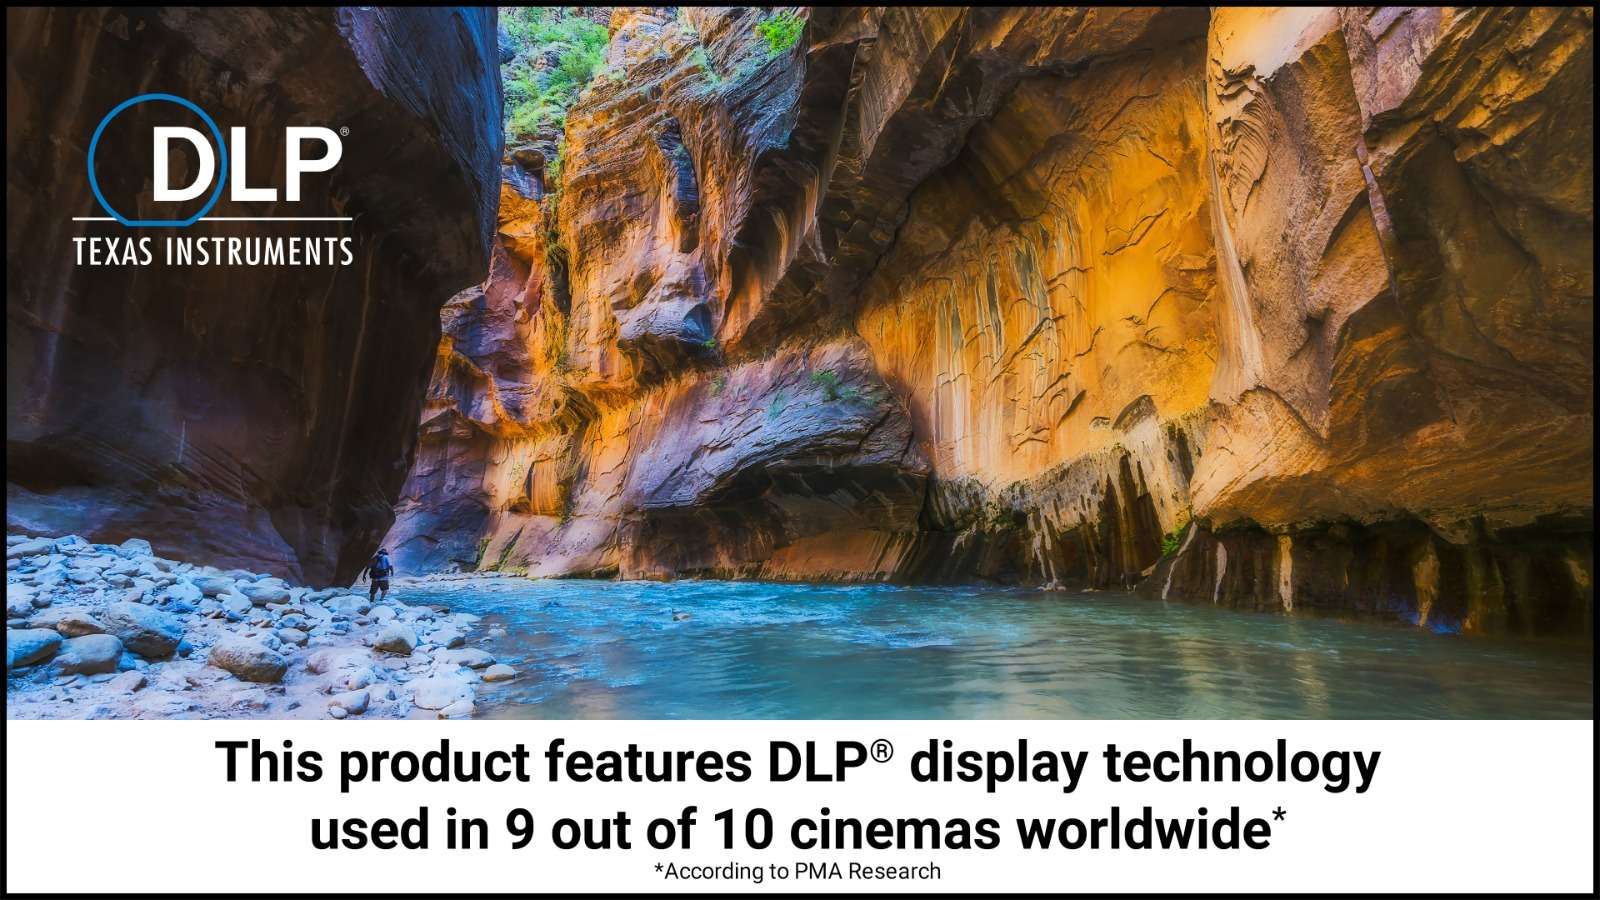 Texas Instruments DLP - Used in 9 out of 10 cinemas worldwide